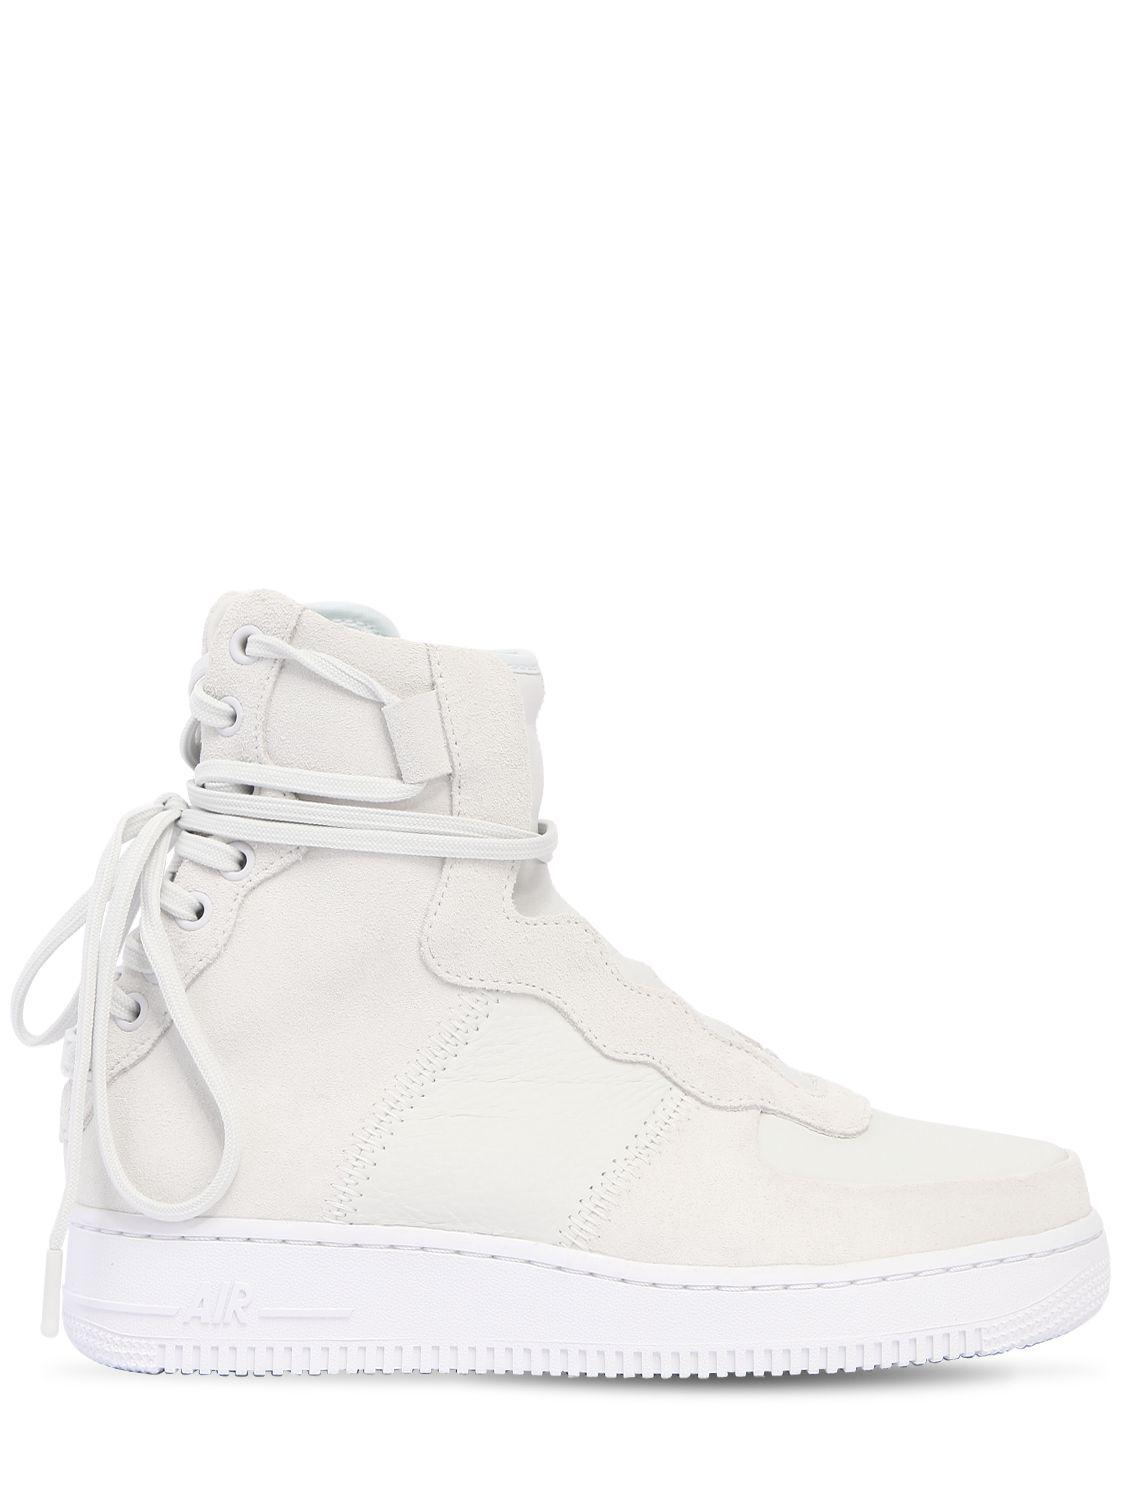 Nike Synthetic Air Force 1 Rebel Xx Sneakers in White Lyst